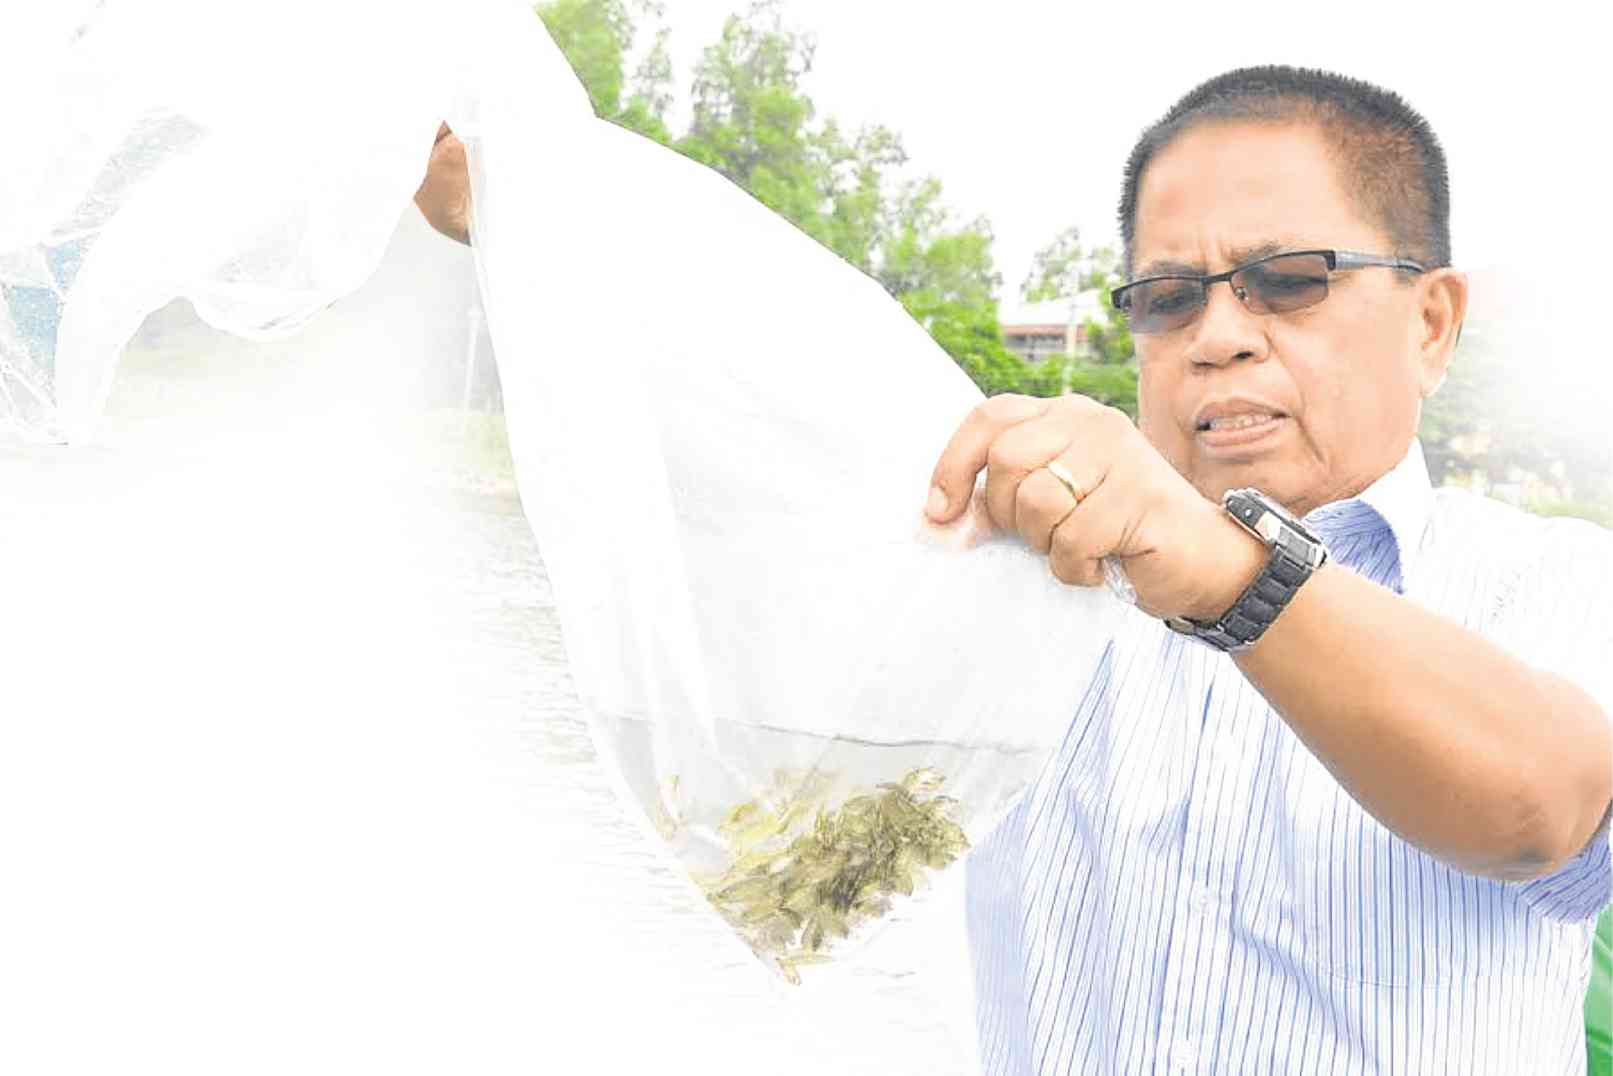 Westly Rosario, NIFTDC chief, holding a bag of sea bass fingerlings that would be released into a river in Dagupan. WILLIE LOMIBAO AND RAY ZAMBRANO / Inquirer Northern Luzon